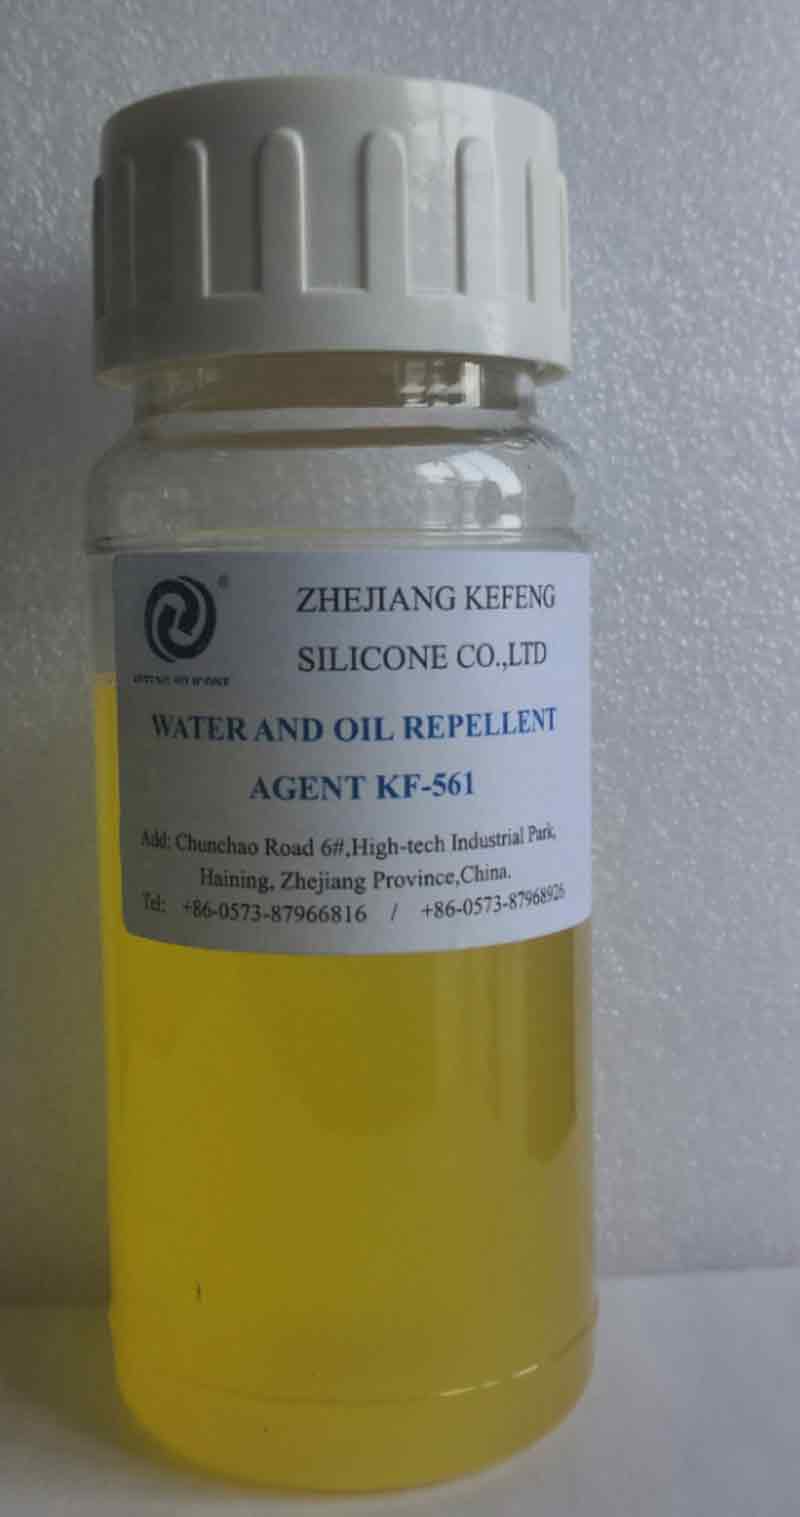 The Benefits of Silicone Based Oil